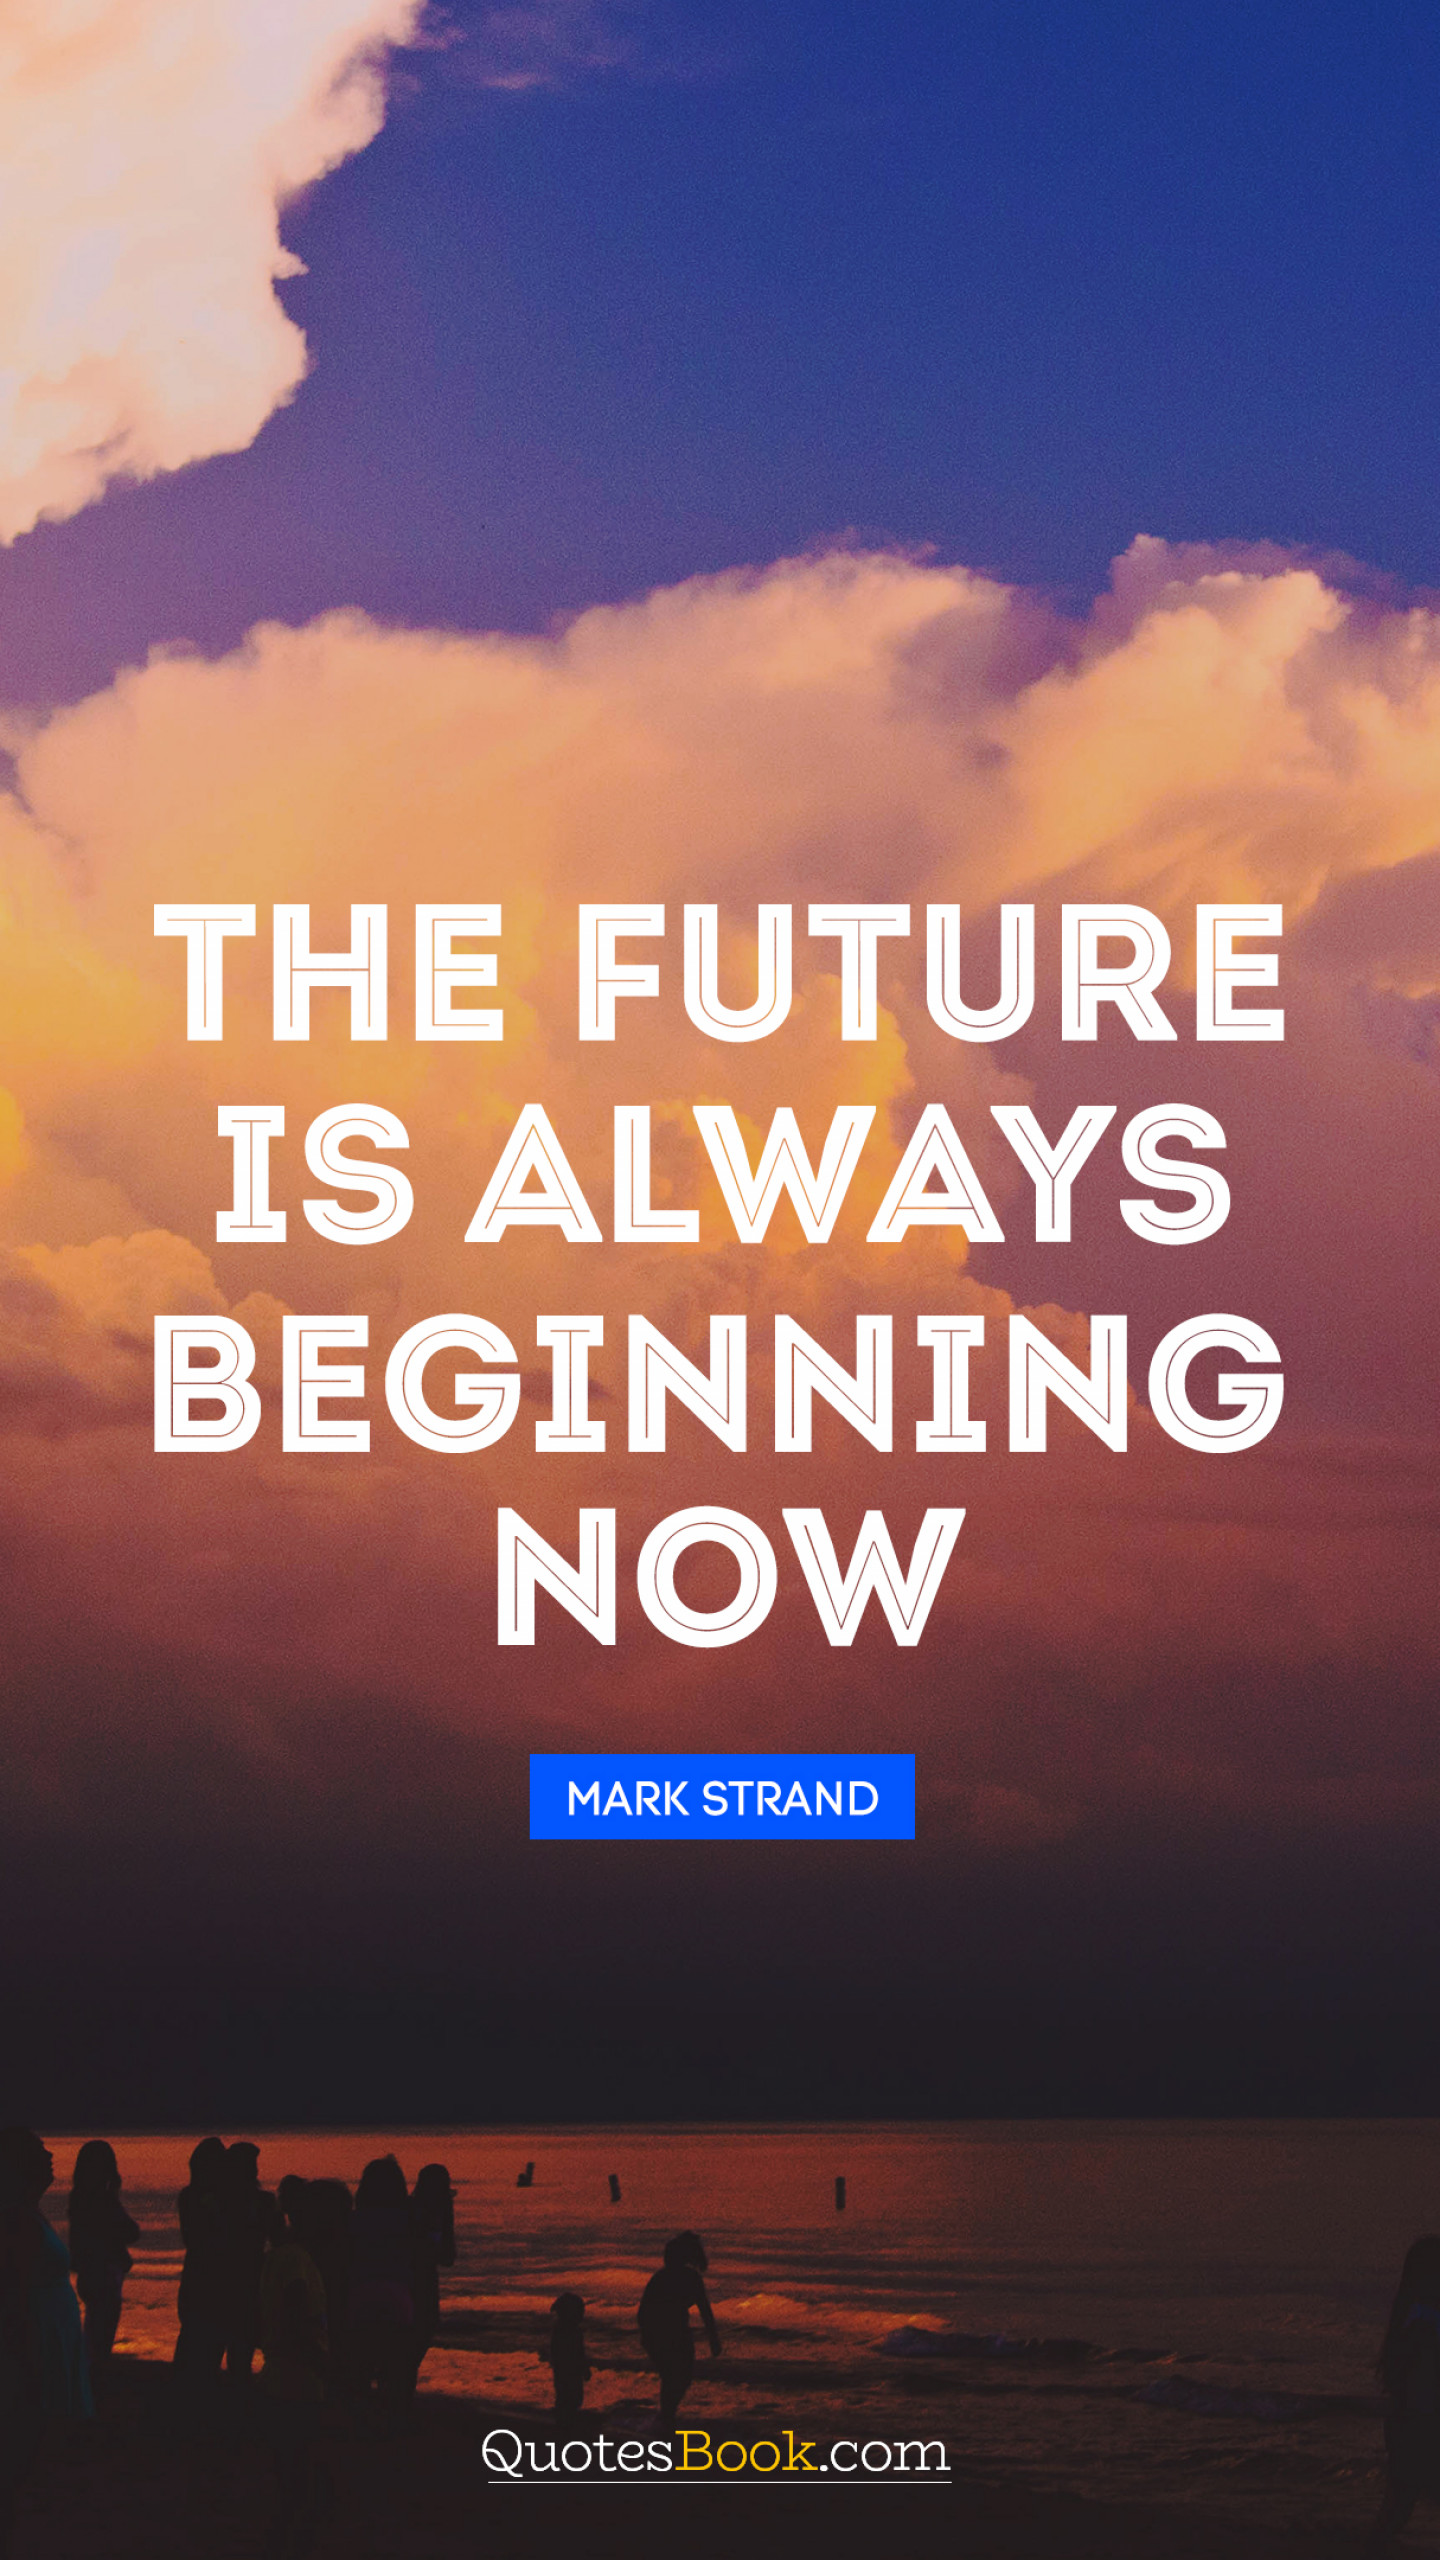 The future is always beginning now. Quote by Mark Strand